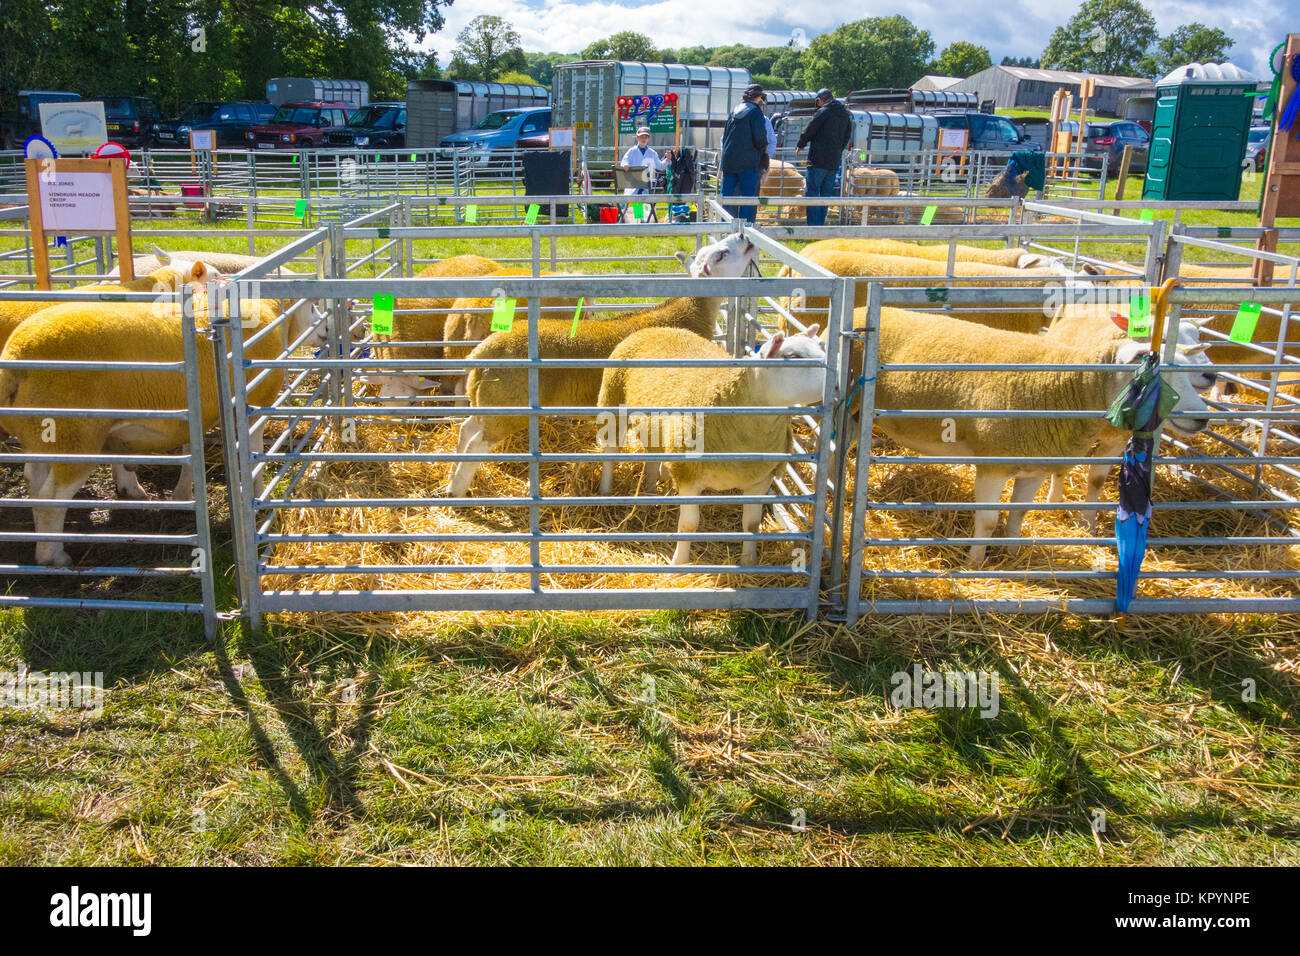 Texel sheep originally bred in the Netherlands but now popular in many countries for it's lean meat. Kington Agricultural Show Herefordshire UK 2017 Stock Photo